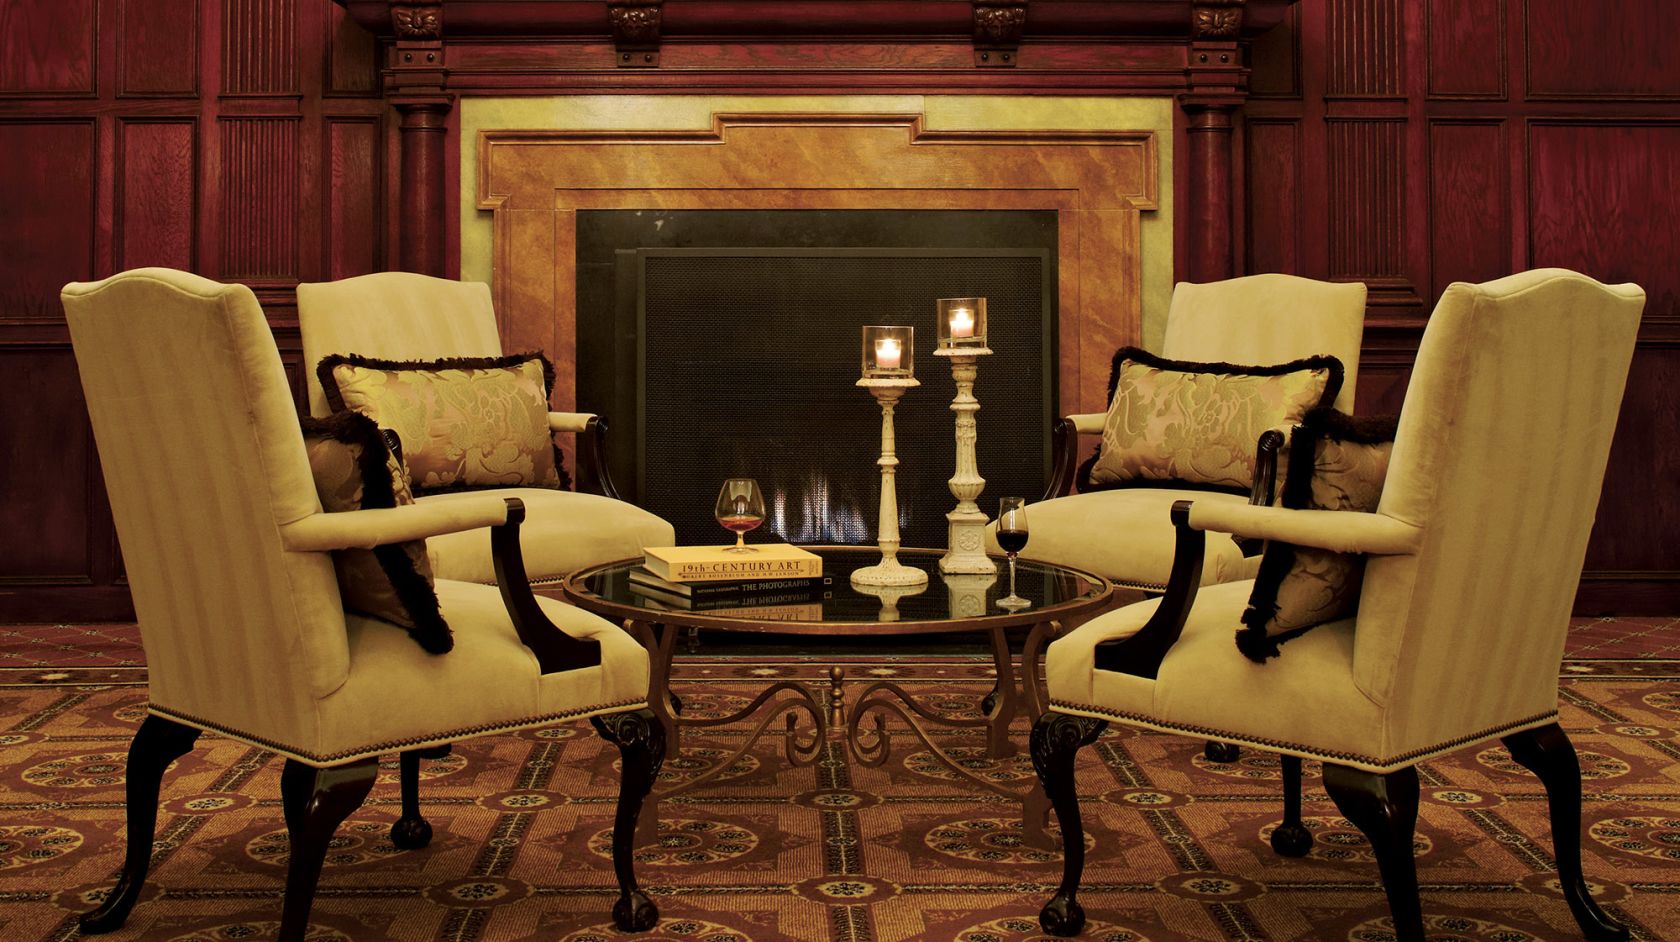 Hay-Adams room fireplace with chairs setting for 4